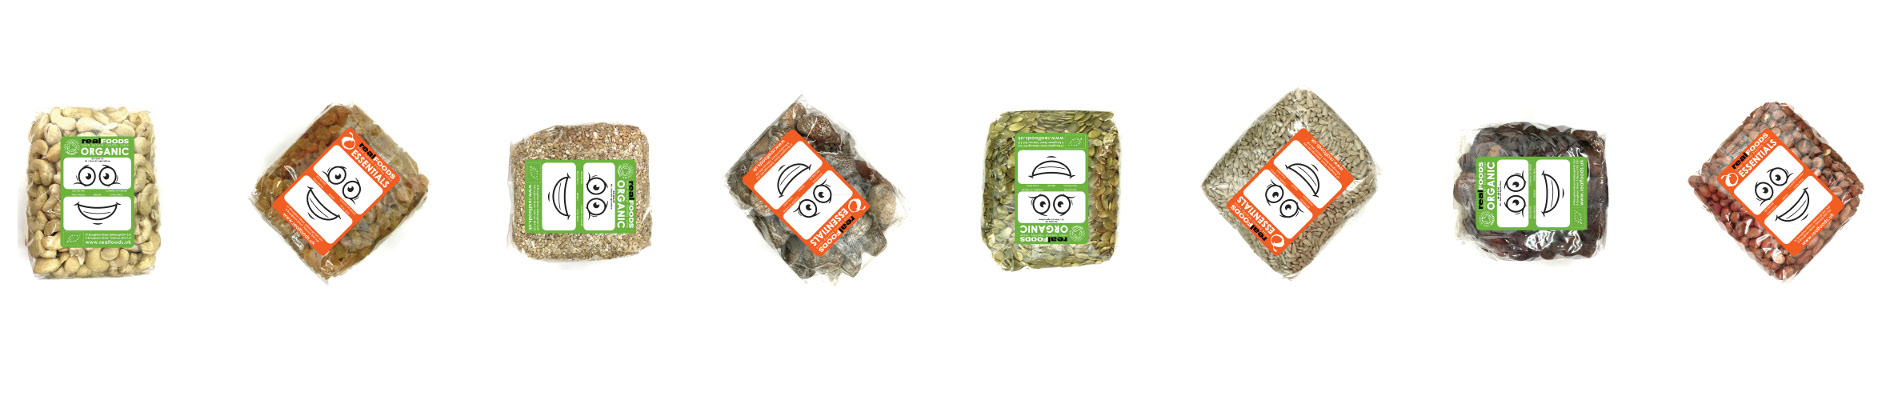 Real-Plastic-Free-Cello-Bags-Cartoon-Faces